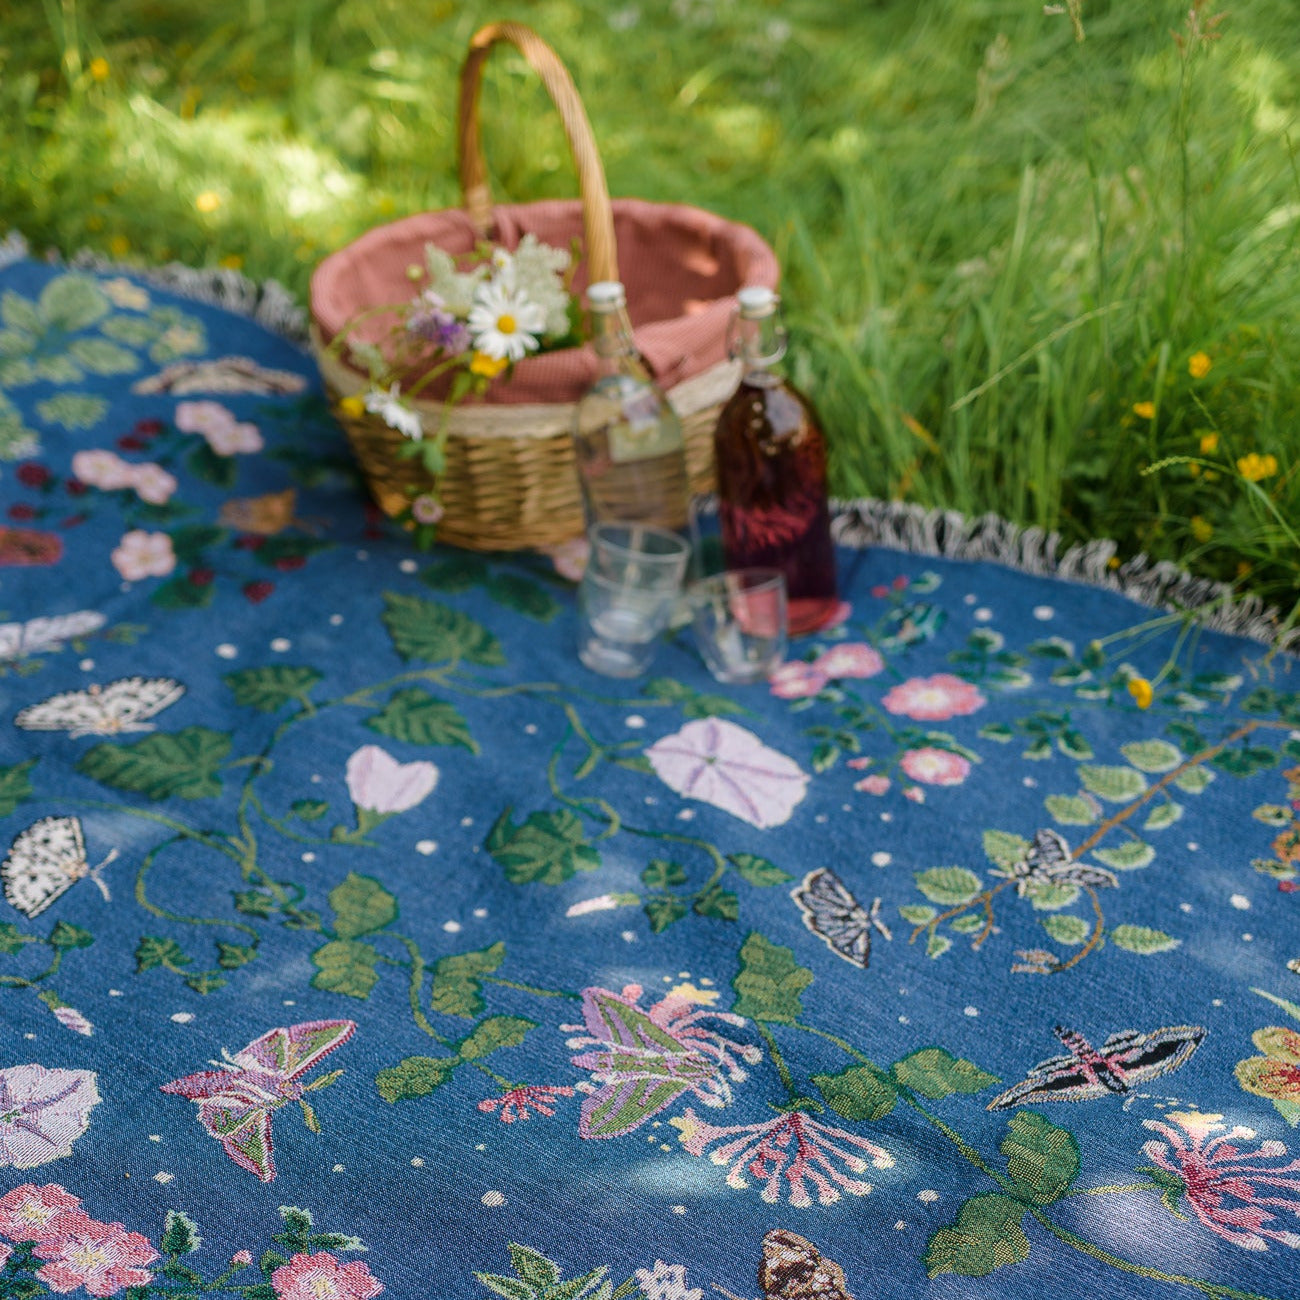 deep blue woven blanket with intricate moth and flower design being used as a magical picnic blanket with drinks and picnic hamper